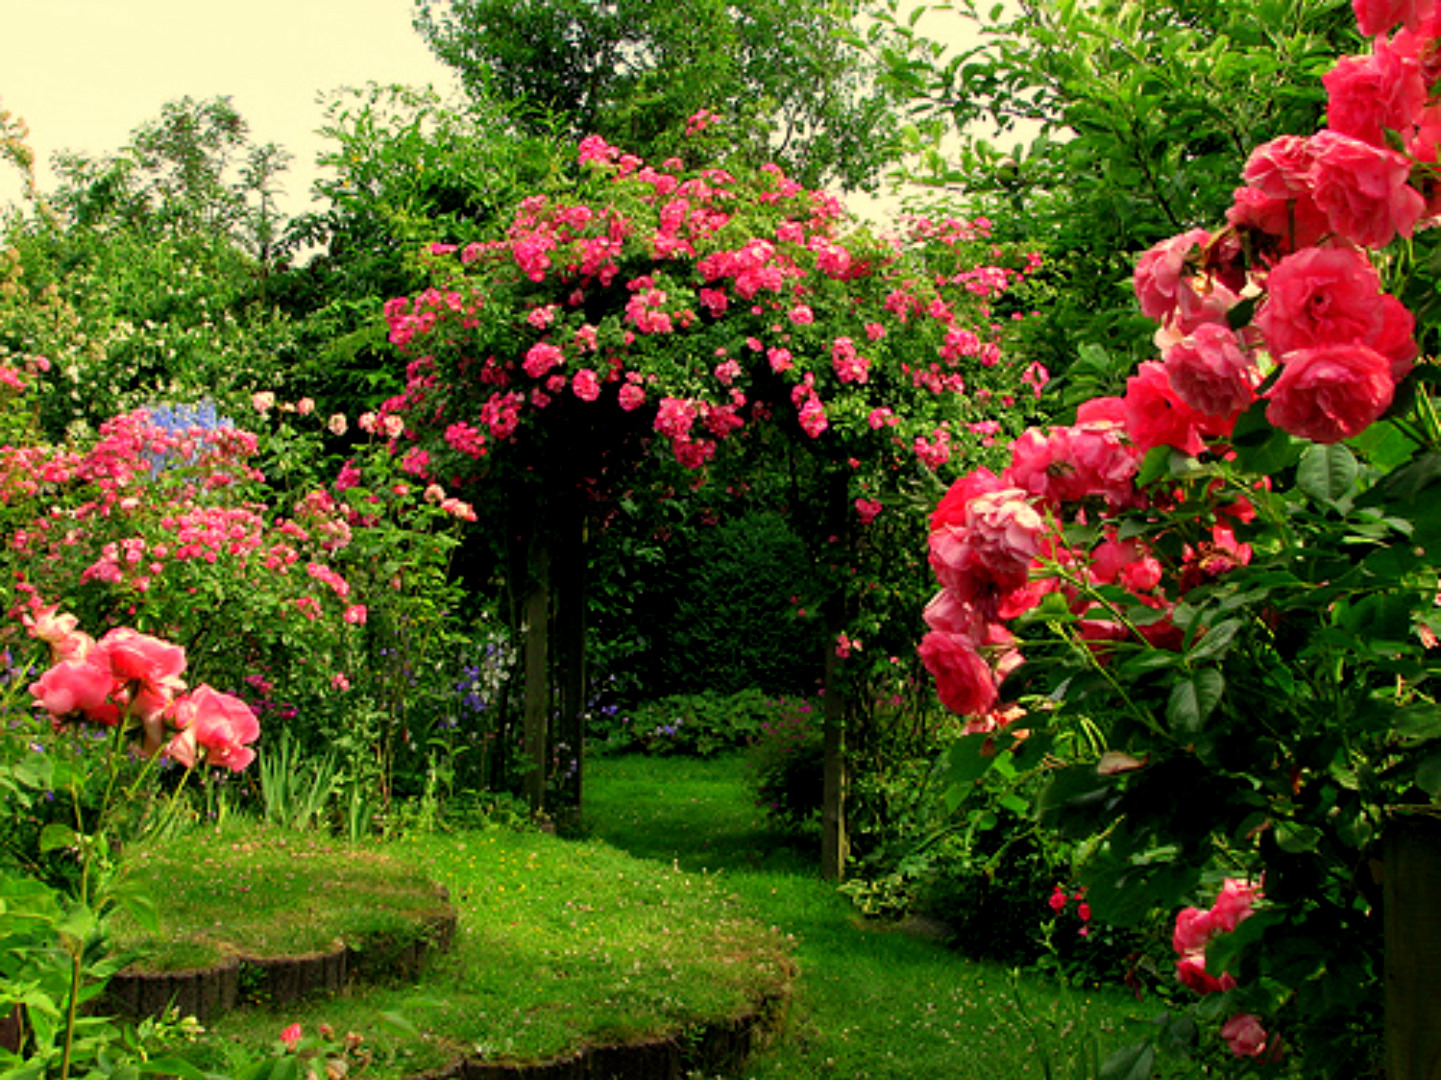 Thanks For Visiting This Pictures Of Rose Flower Garden Post Please